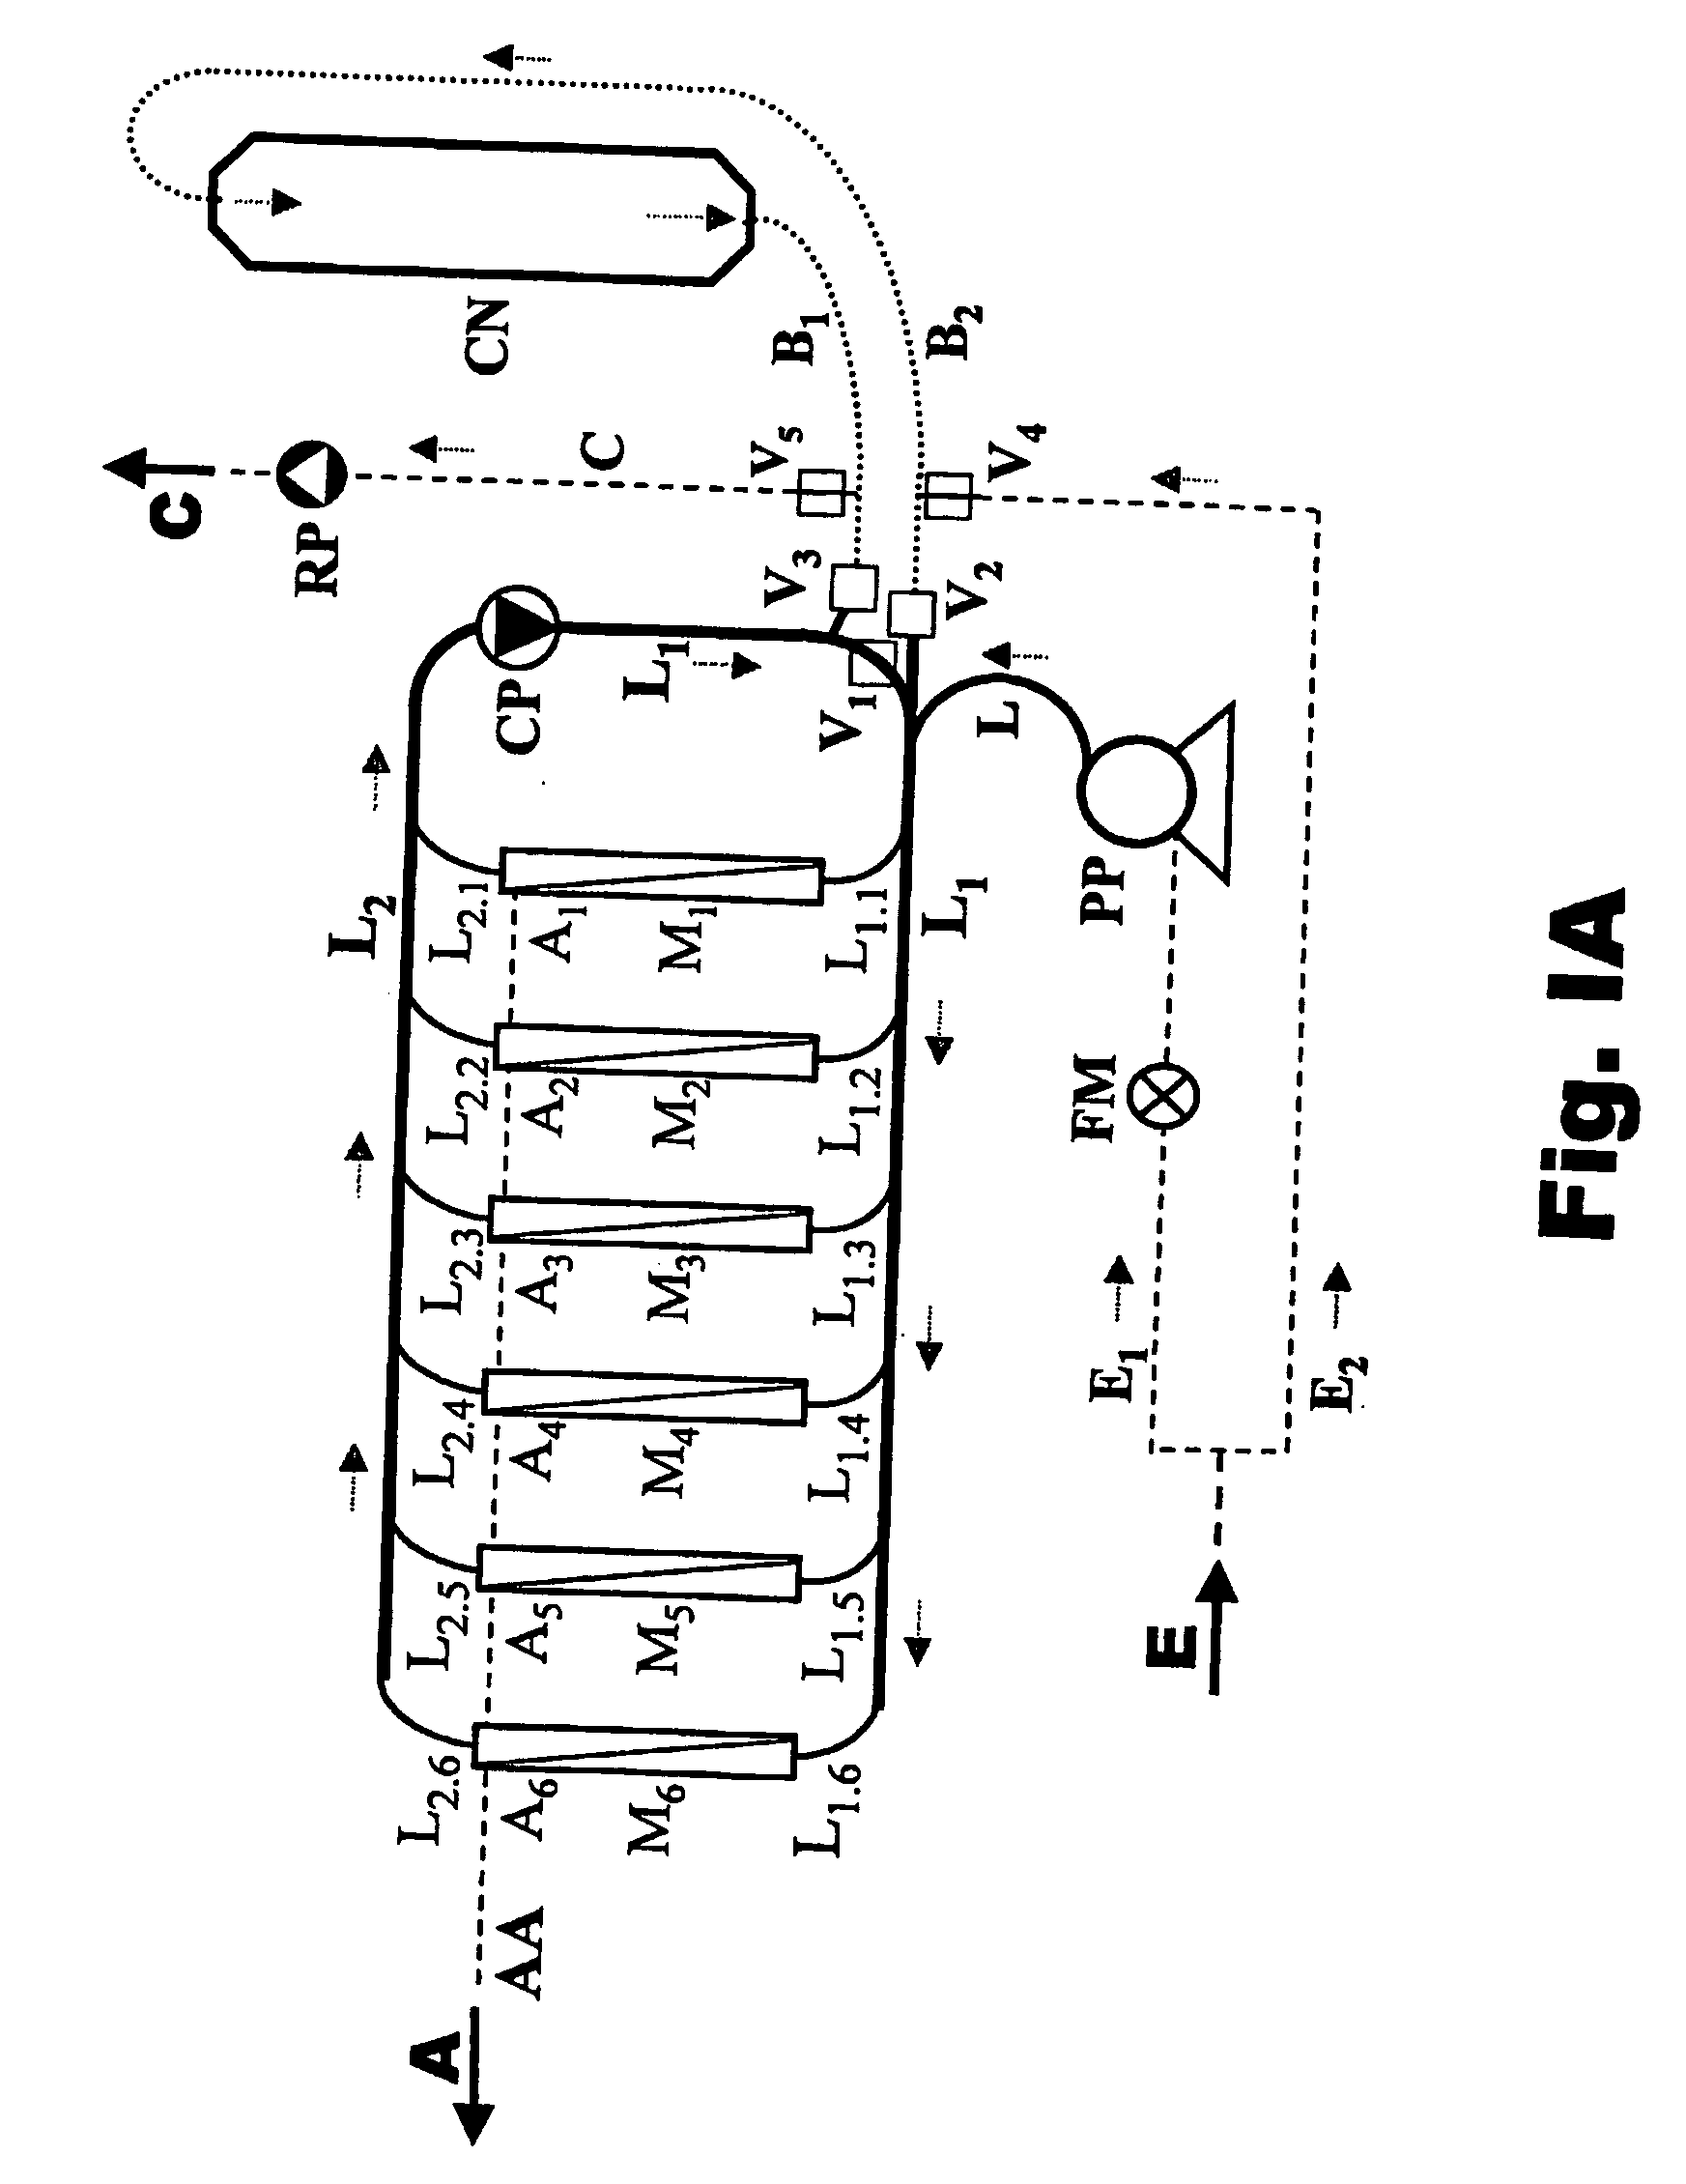 Apparatus for continuous closed circuit desalination under variable pressure a single container